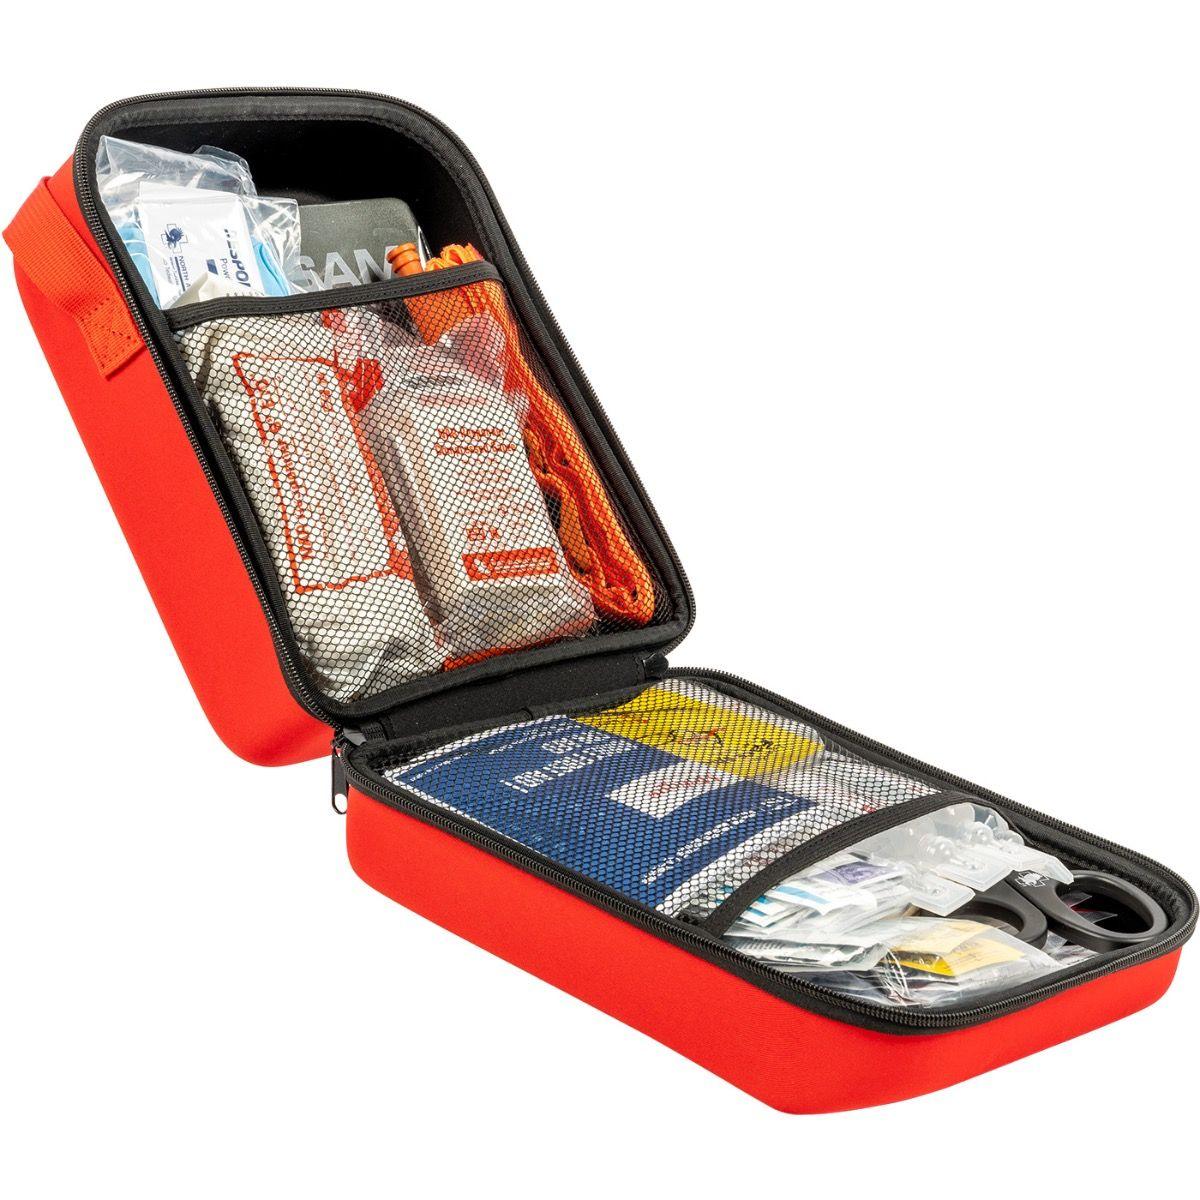 RED - Ready Every Day - Home Aid Kit - Vendor